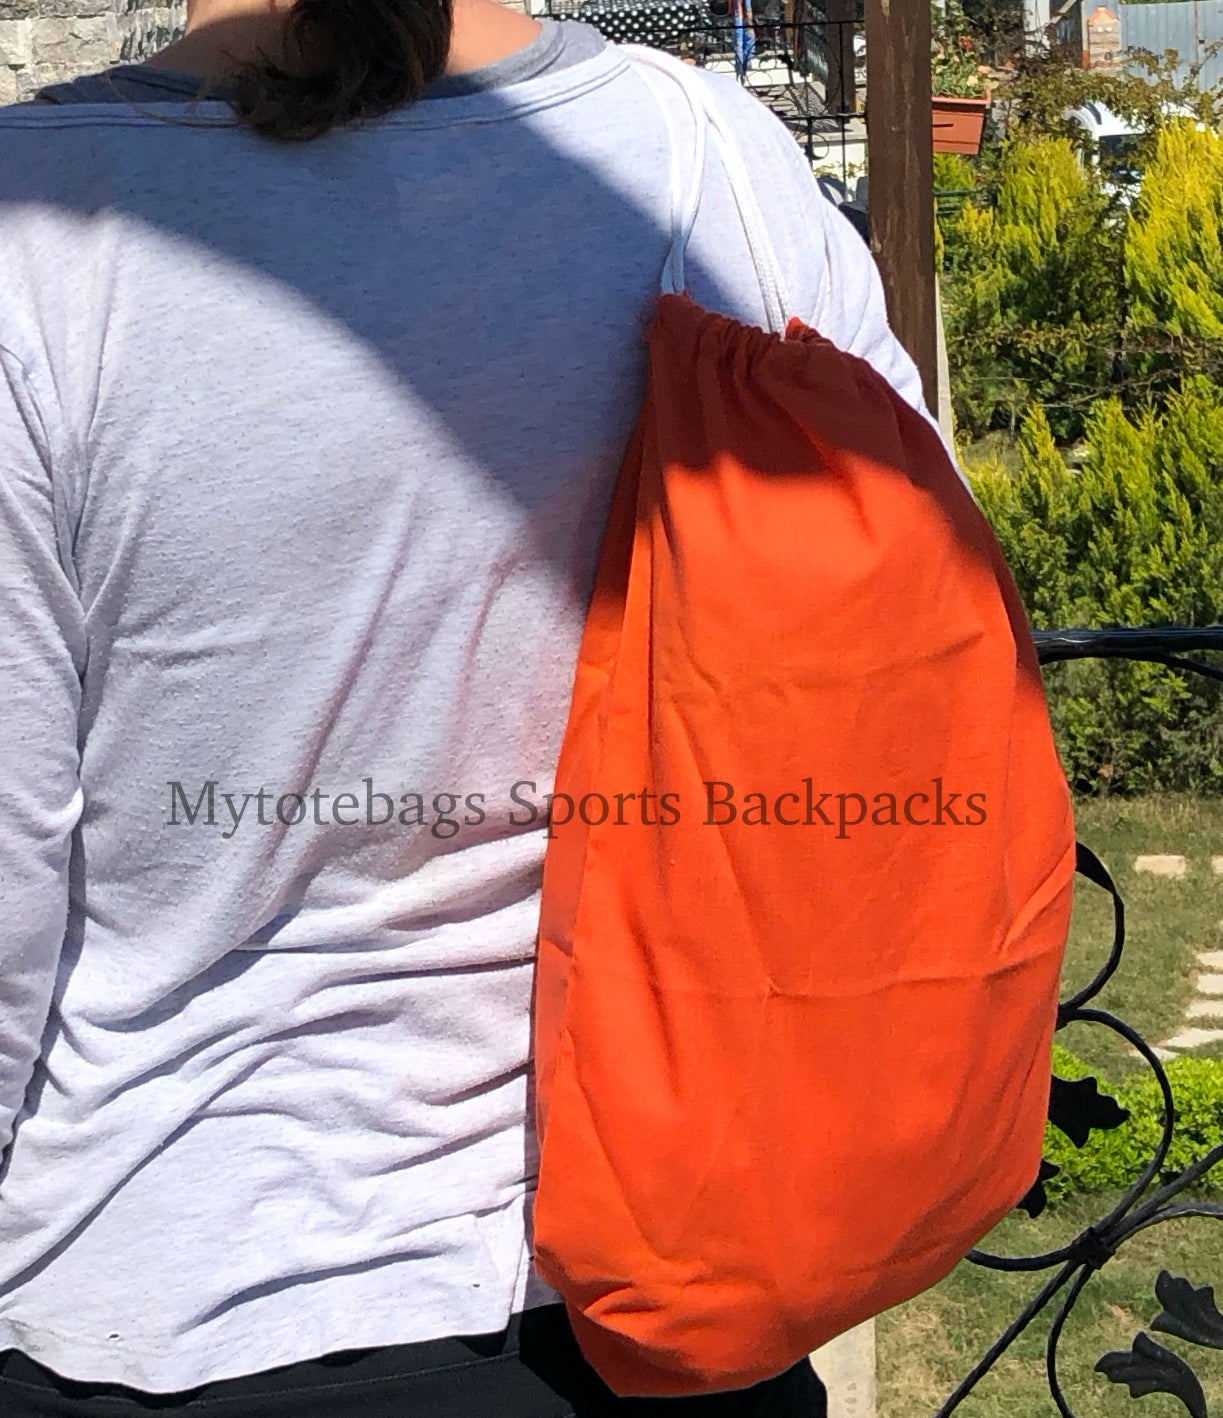 wholesale Canvas Cotton Drawstring Backpacks Tote Bags orange red